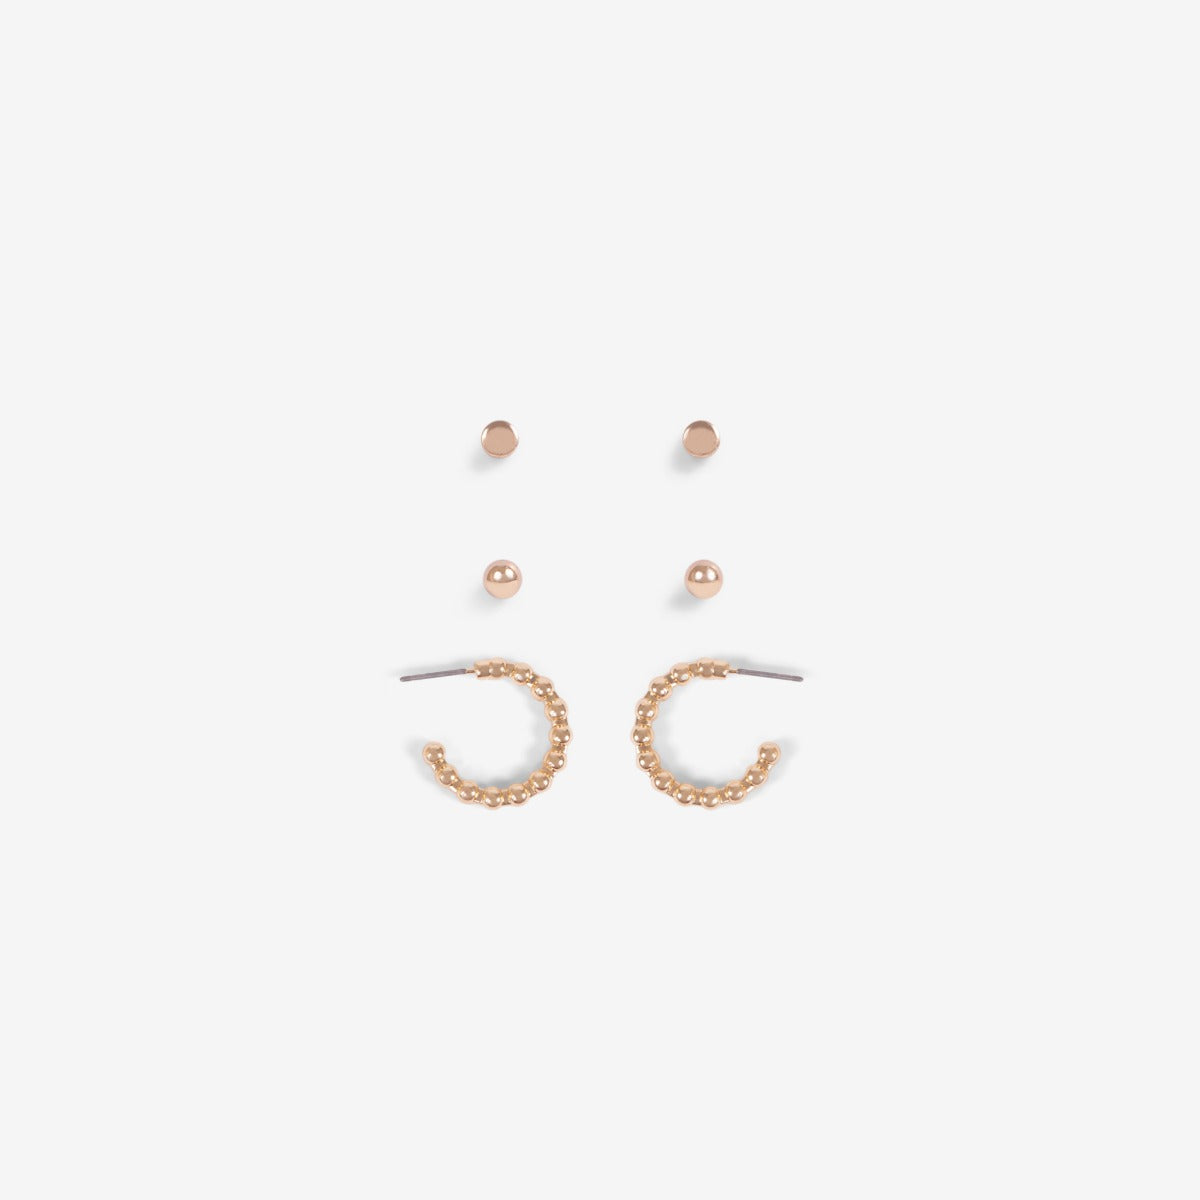 Trio of golden earrings hoops, beads and flat circles